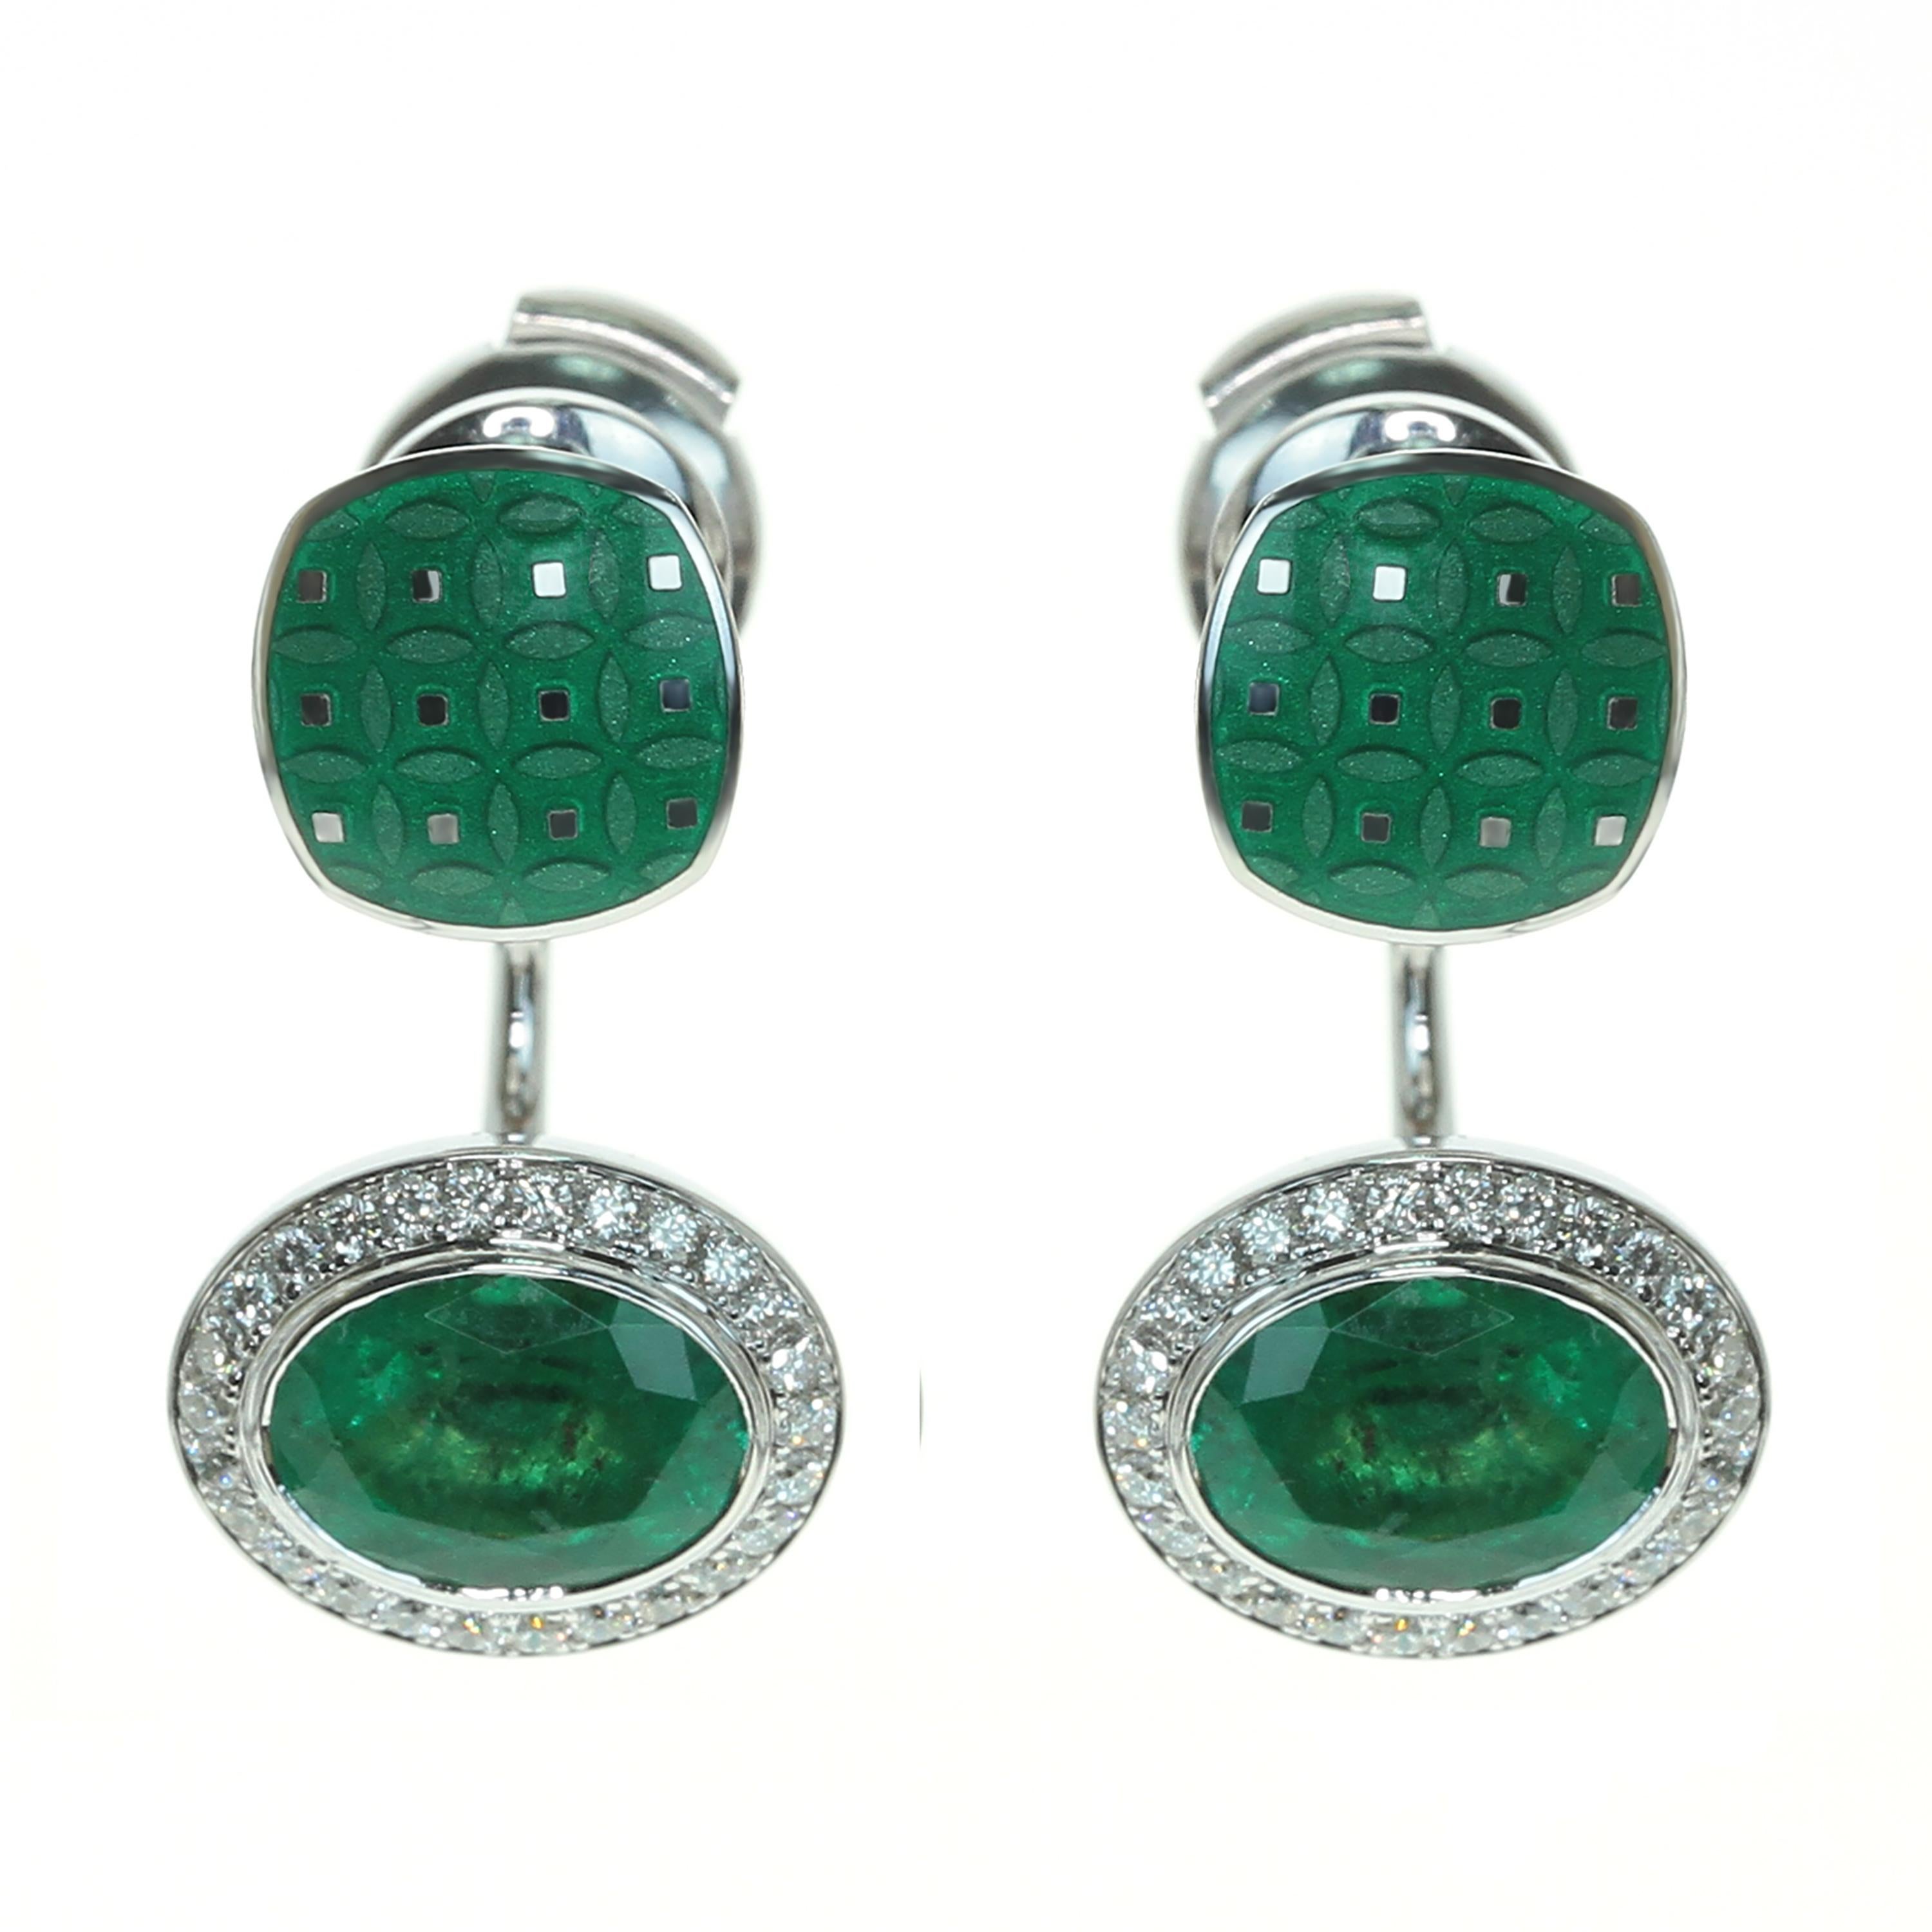 Emerald 2.34 Carat Diamond Enamel 18 Karat White Gold Earrings
Please take a look at one of our trade mark texture in Kaleidoscope Collection - 